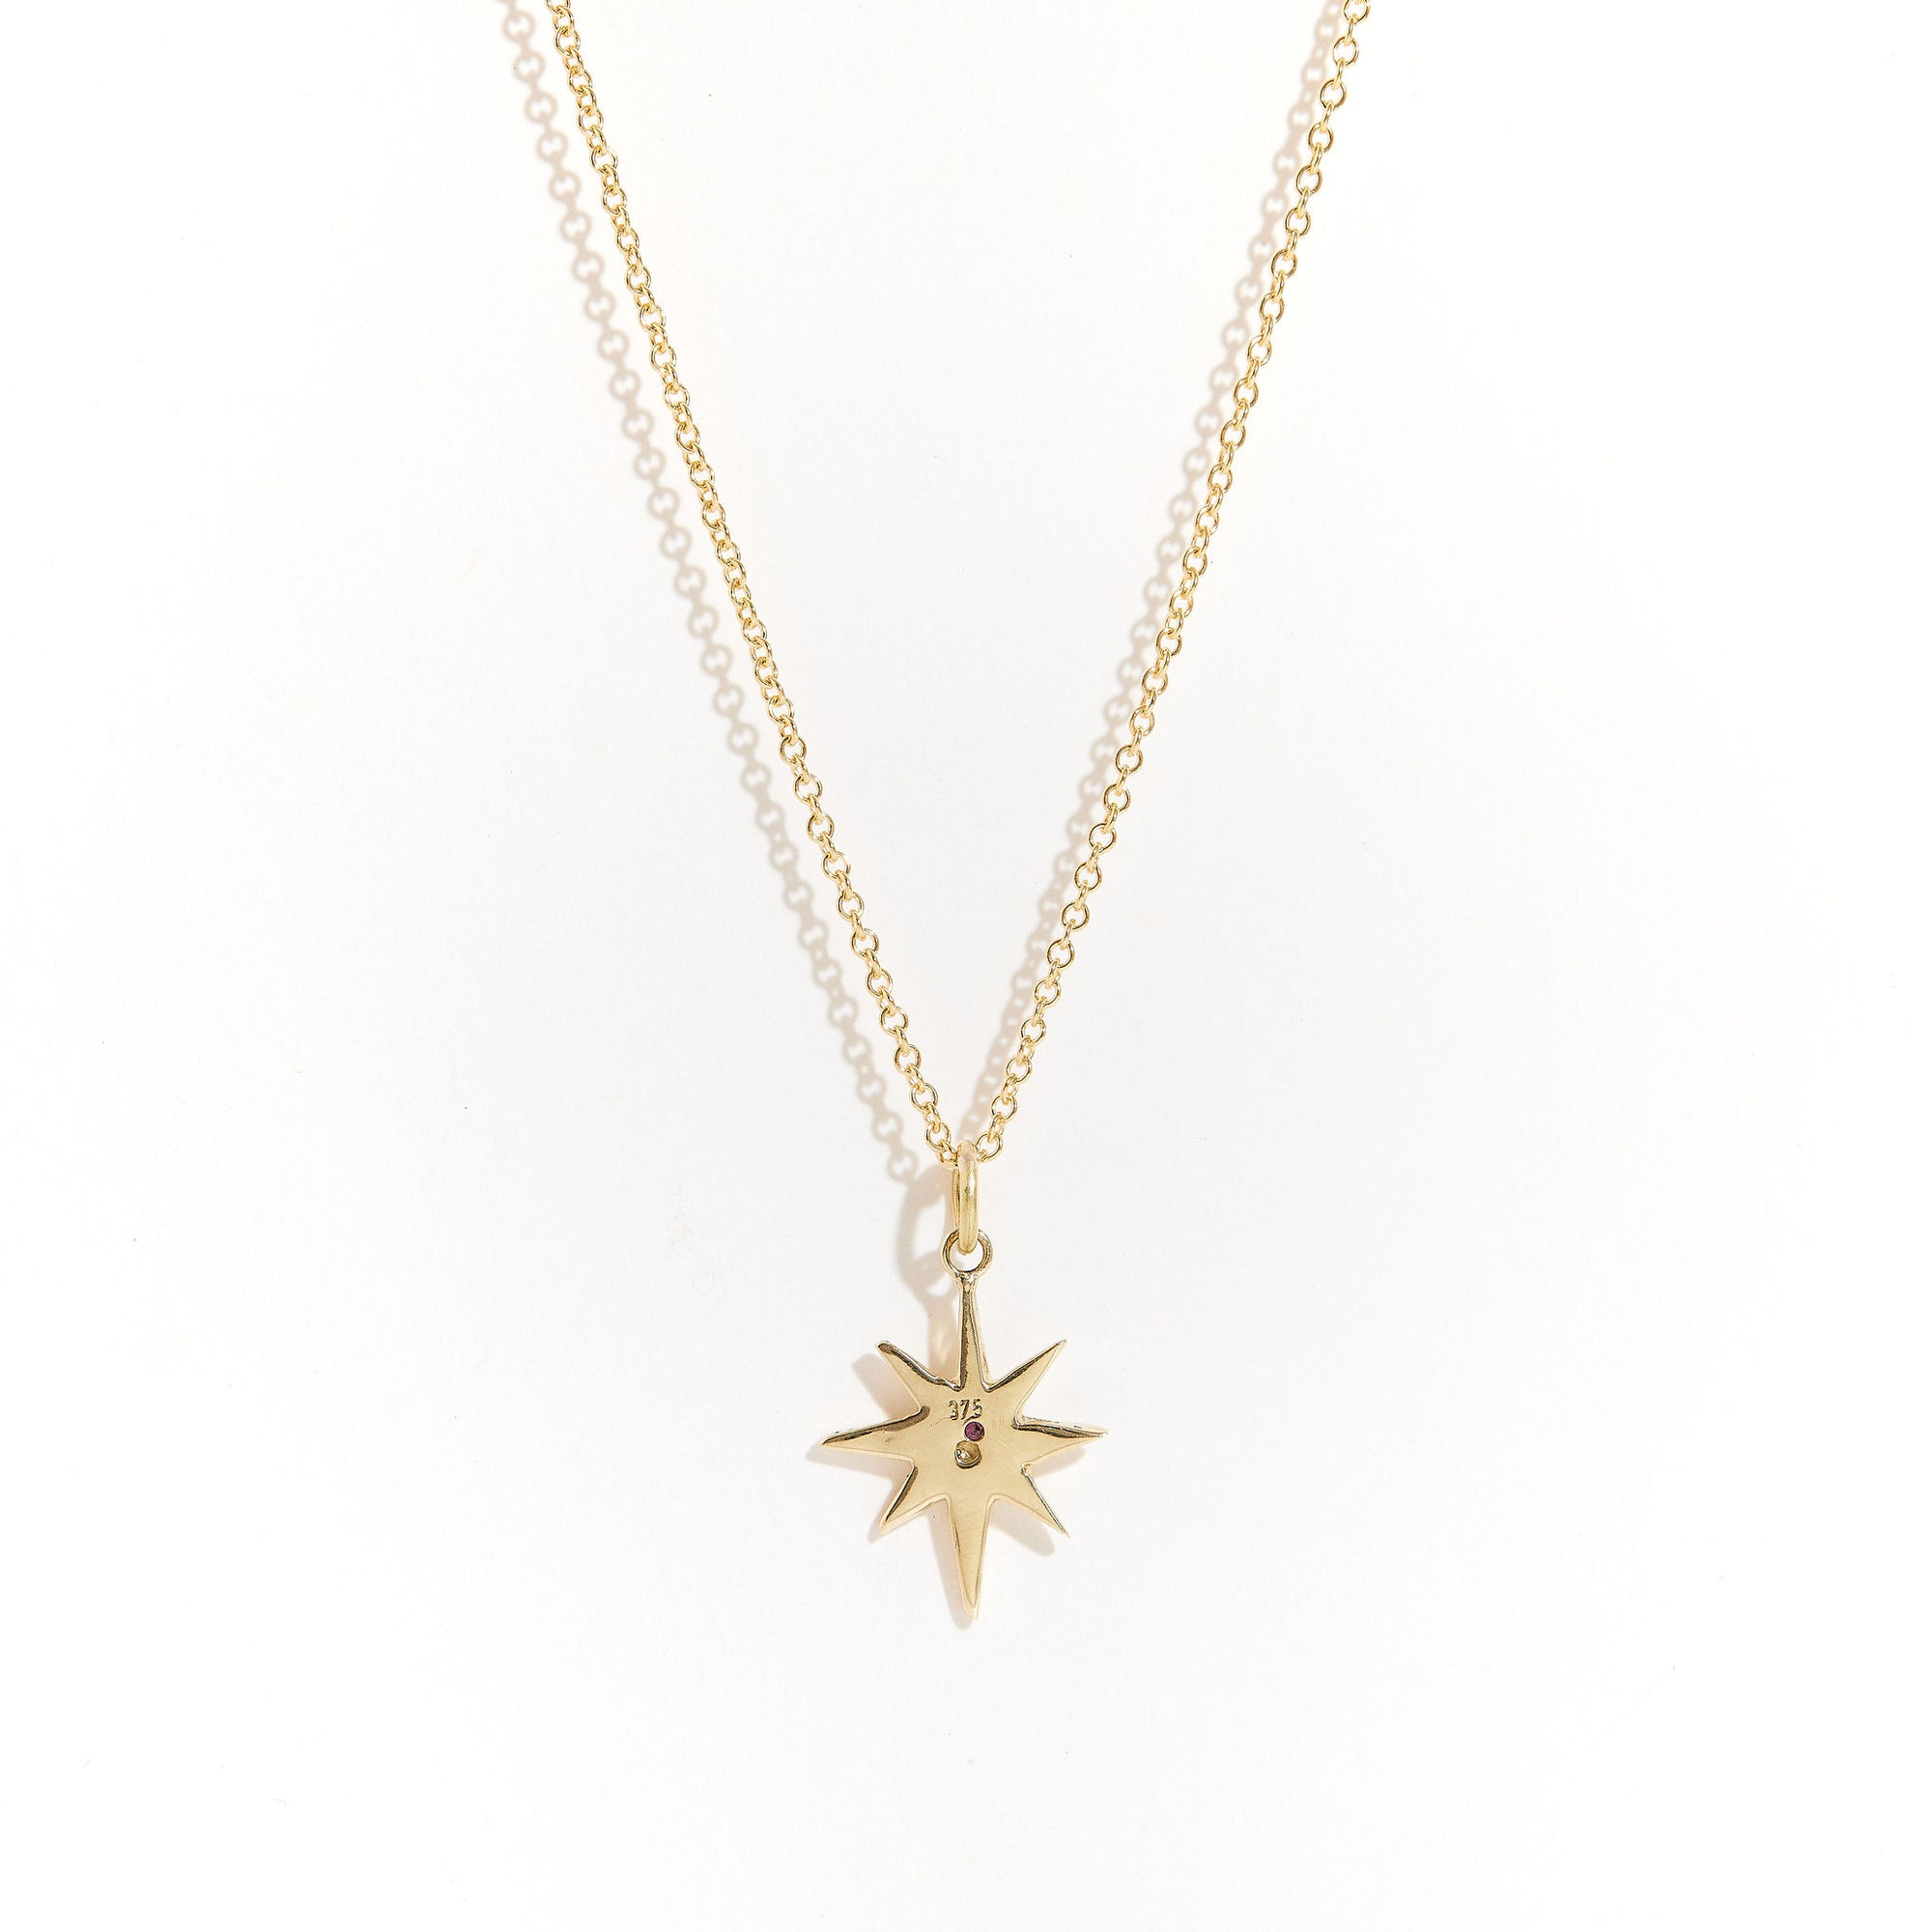 Bespoke handcrafted in Melbourne a 9ct yellow recycled, refined gold star shaped pendant with pink sapphire.